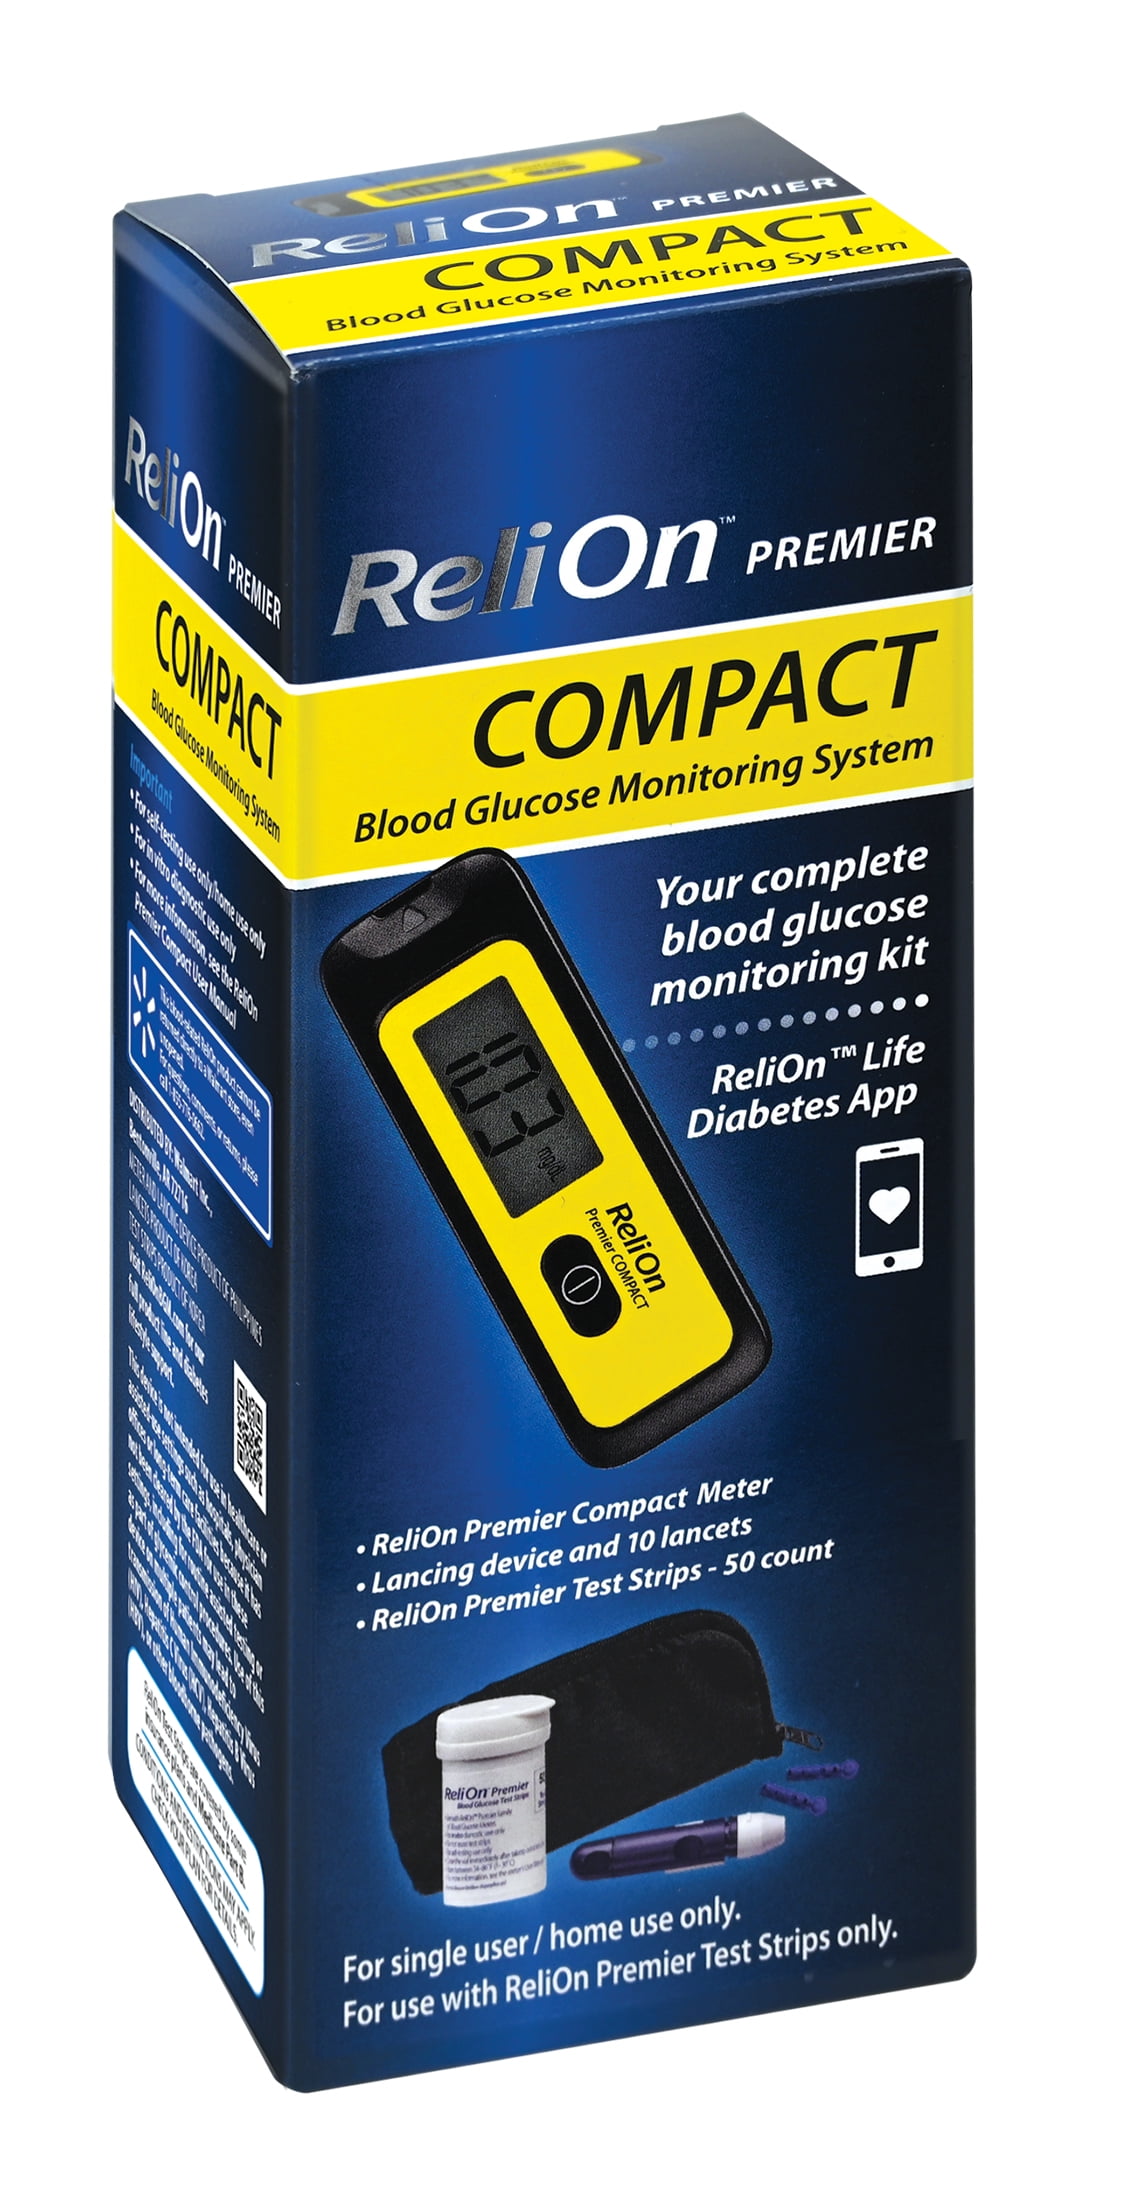 ReliOn Premier Compact Blood Glucose Monitoring System